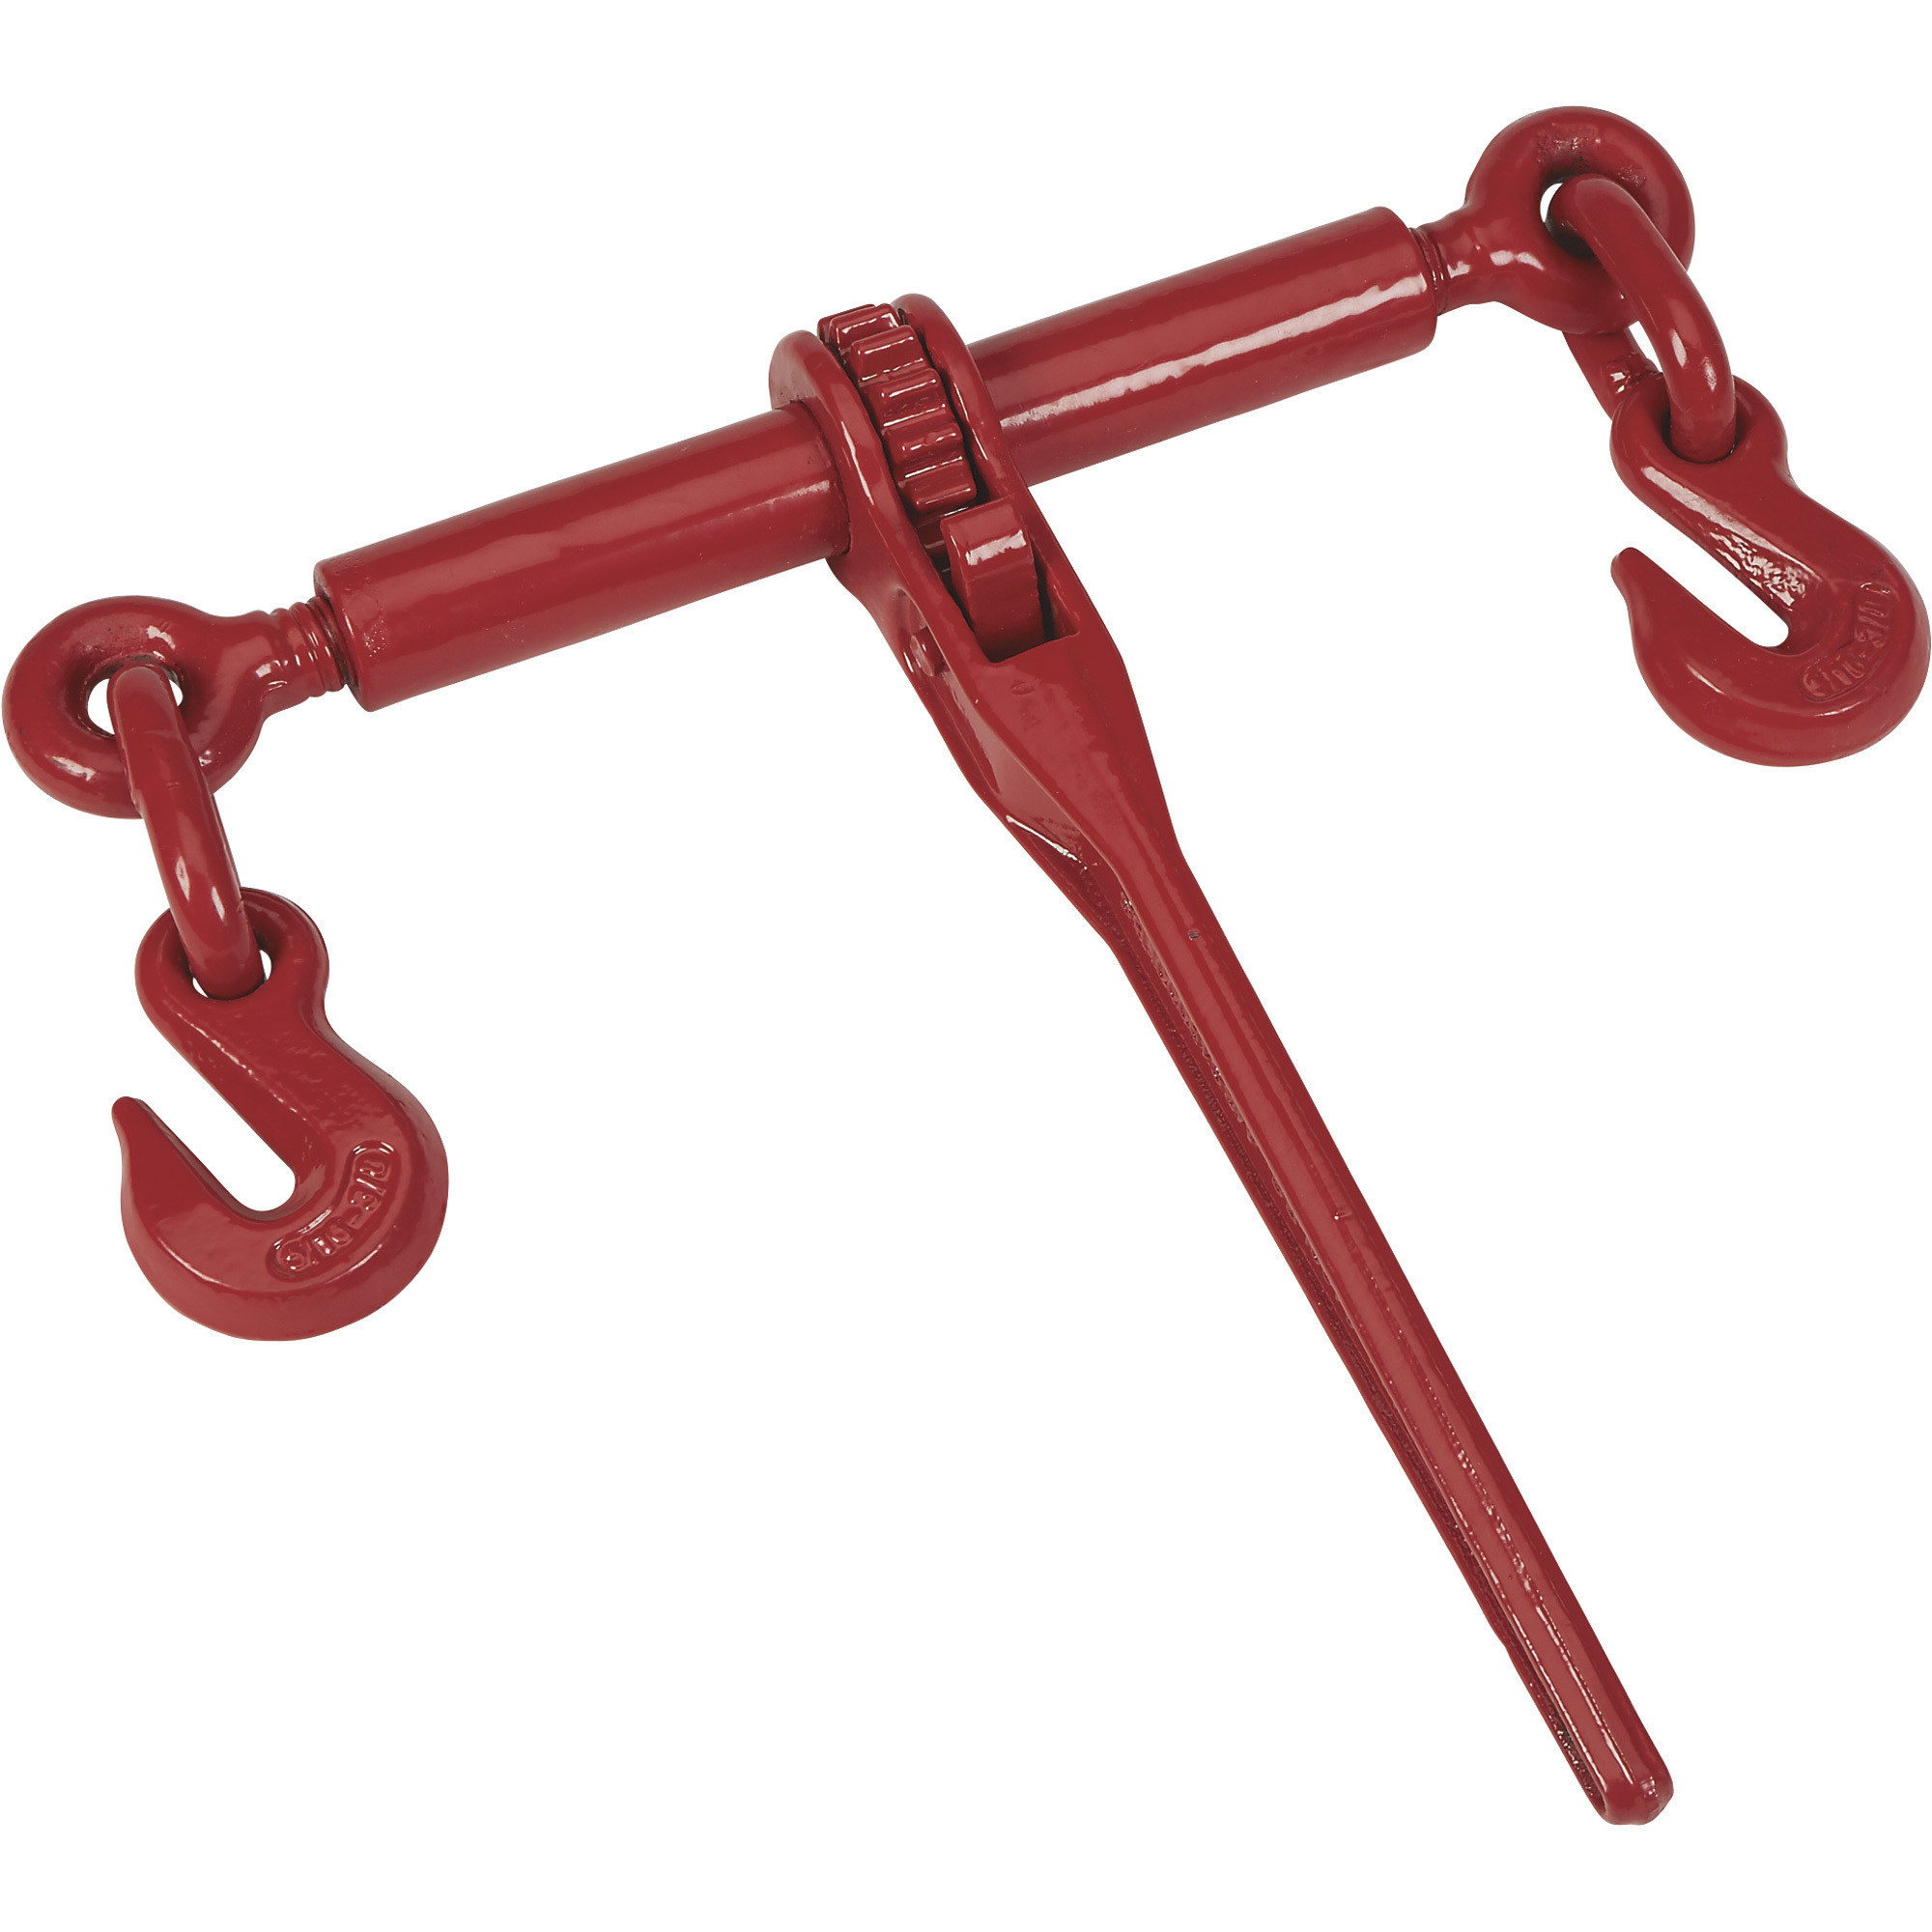 Ultra-Tow 5/16Inch Ratchet Chain Binder, 5400-Lb. Load Capacity